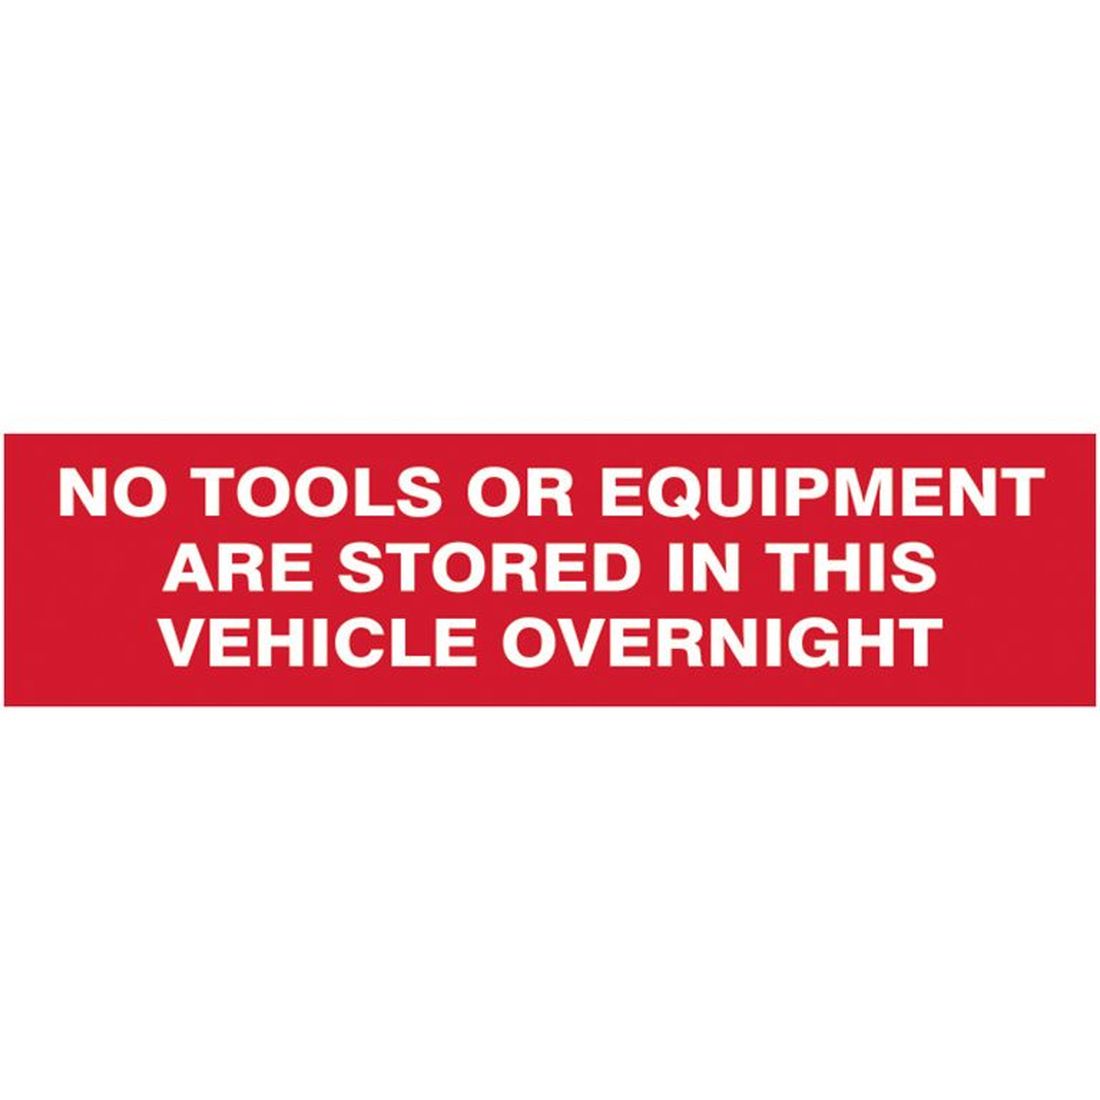 Scan No Tools Or Equipment Stored In This Vehicle Overnight - SAV/CLG 200 x 50mm     